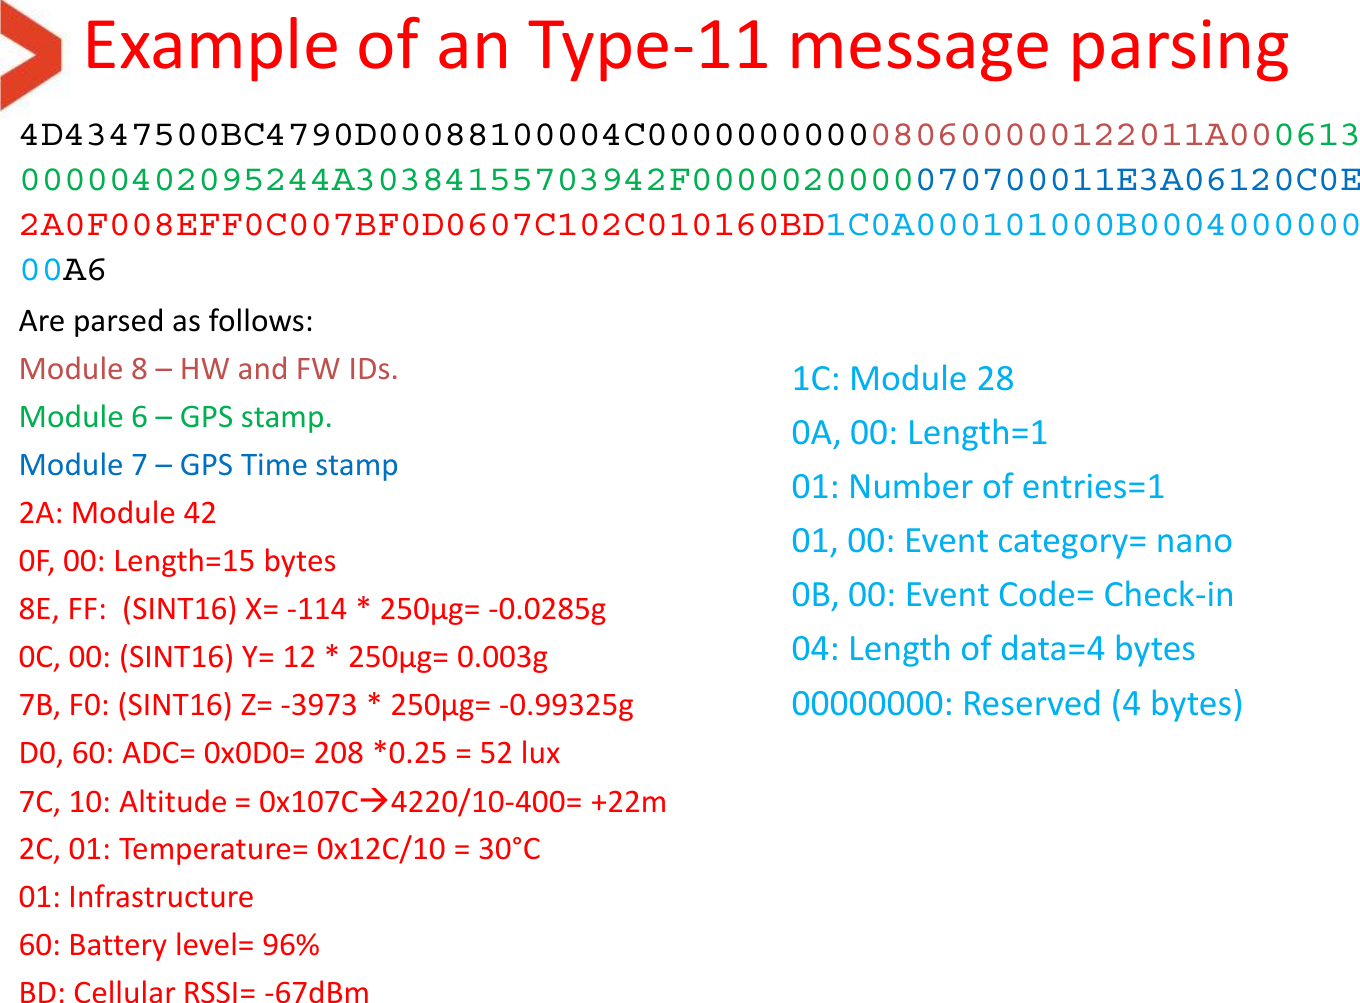 Example of an Type-11 message parsing  4D4347500BC4790D00088100004C0000000000080600000122011A00061300000402095244A30384155703942F0000020000070700011E3A06120C0E2A0F008EFF0C007BF0D0607C102C010160BD1C0A000101000B000400000000A6 Are parsed as follows: Module 8 – HW and FW IDs. Module 6 – GPS stamp. Module 7 – GPS Time stamp 2A: Module 42 0F, 00: Length=15 bytes  8E, FF:  (SINT16) X= -114 * 250µg= -0.0285g 0C, 00: (SINT16) Y= 12 * 250µg= 0.003g 7B, F0: (SINT16) Z= -3973 * 250µg= -0.99325g D0, 60: ADC= 0x0D0= 208 *0.25 = 52 lux 7C, 10: Altitude = 0x107C4220/10-400= +22m 2C, 01: Temperature= 0x12C/10 = 30°C 01: Infrastructure 60: Battery level= 96% BD: Cellular RSSI= -67dBm 1C: Module 28 0A, 00: Length=1 01: Number of entries=1 01, 00: Event category= nano 0B, 00: Event Code= Check-in 04: Length of data=4 bytes 00000000: Reserved (4 bytes) 